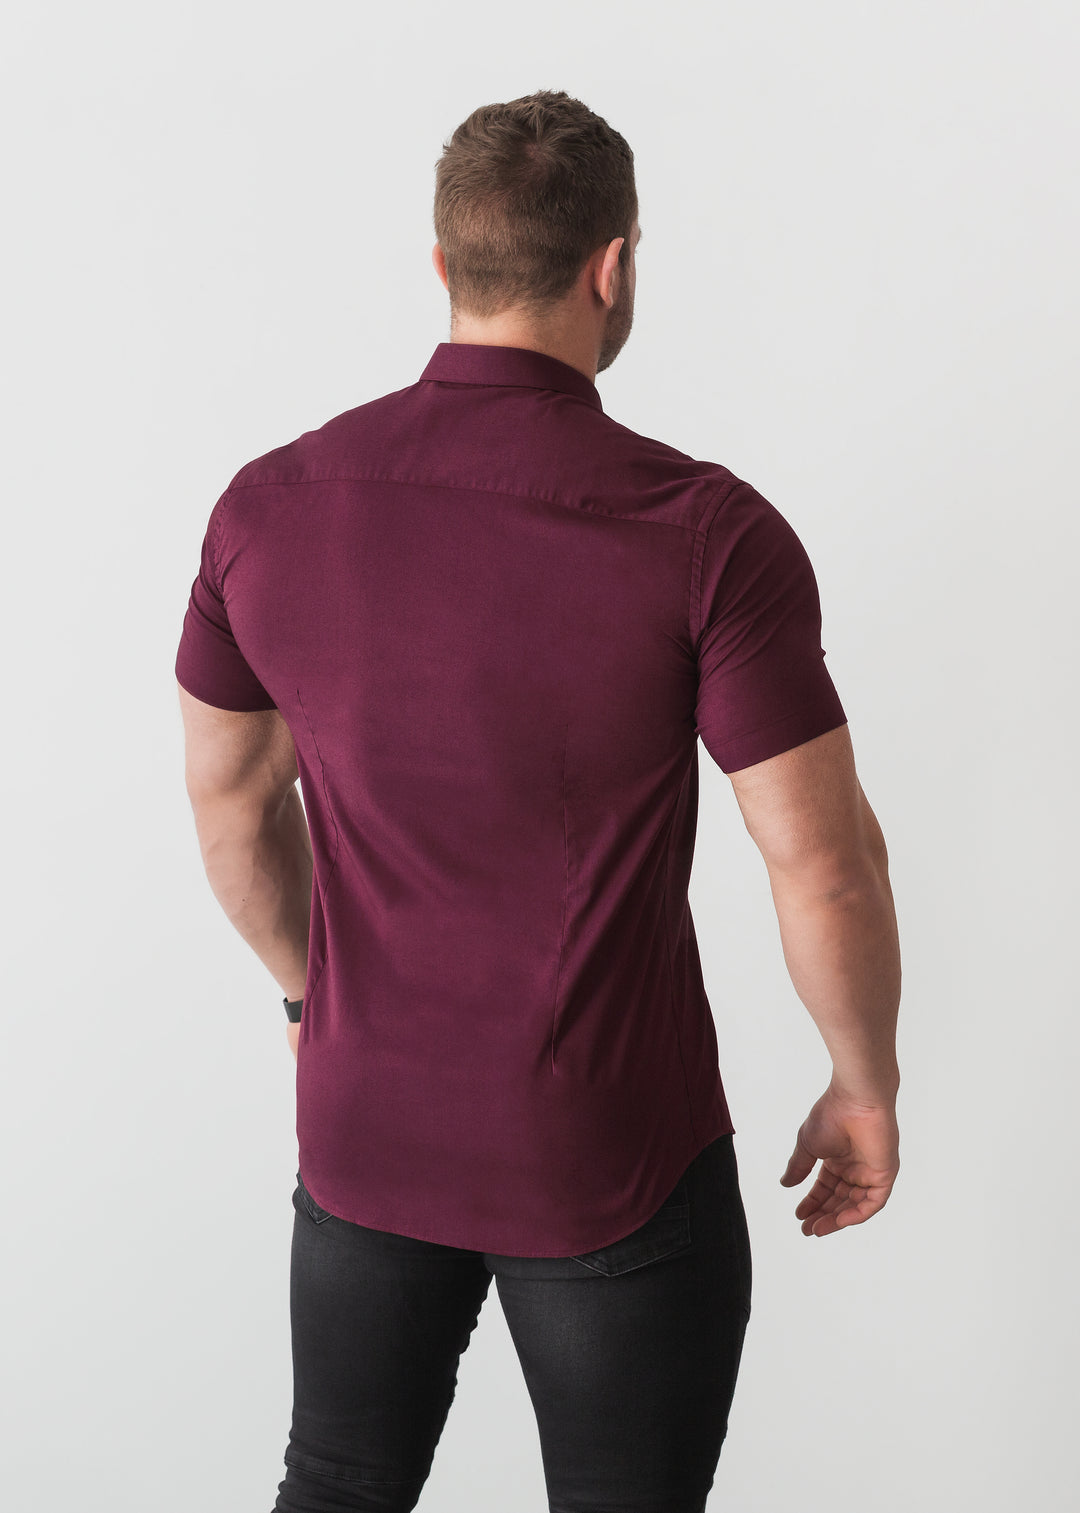 Burgundy Short Sleeve Tapered Fit Shirt For Men. A Proportionally Fitted and Comfortable Burgundy Short Sleeve Muscle Fit Shirt. The Best Shirts For a Muscular Build.